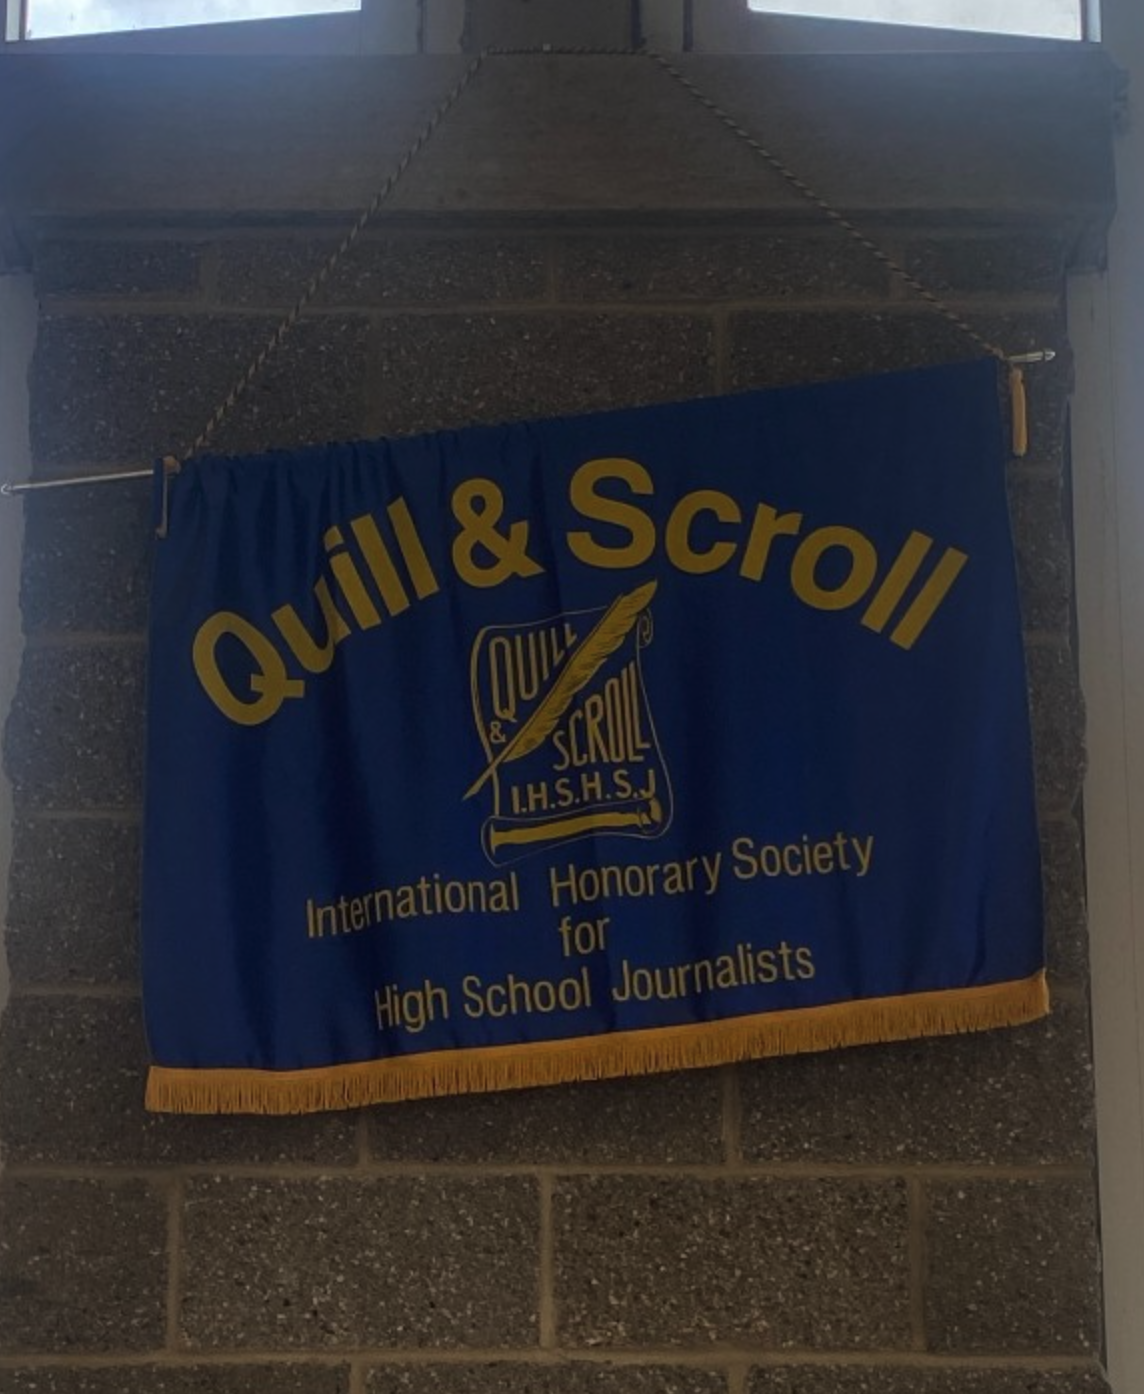 Journalism’s National Honor Society: Quill and Scroll